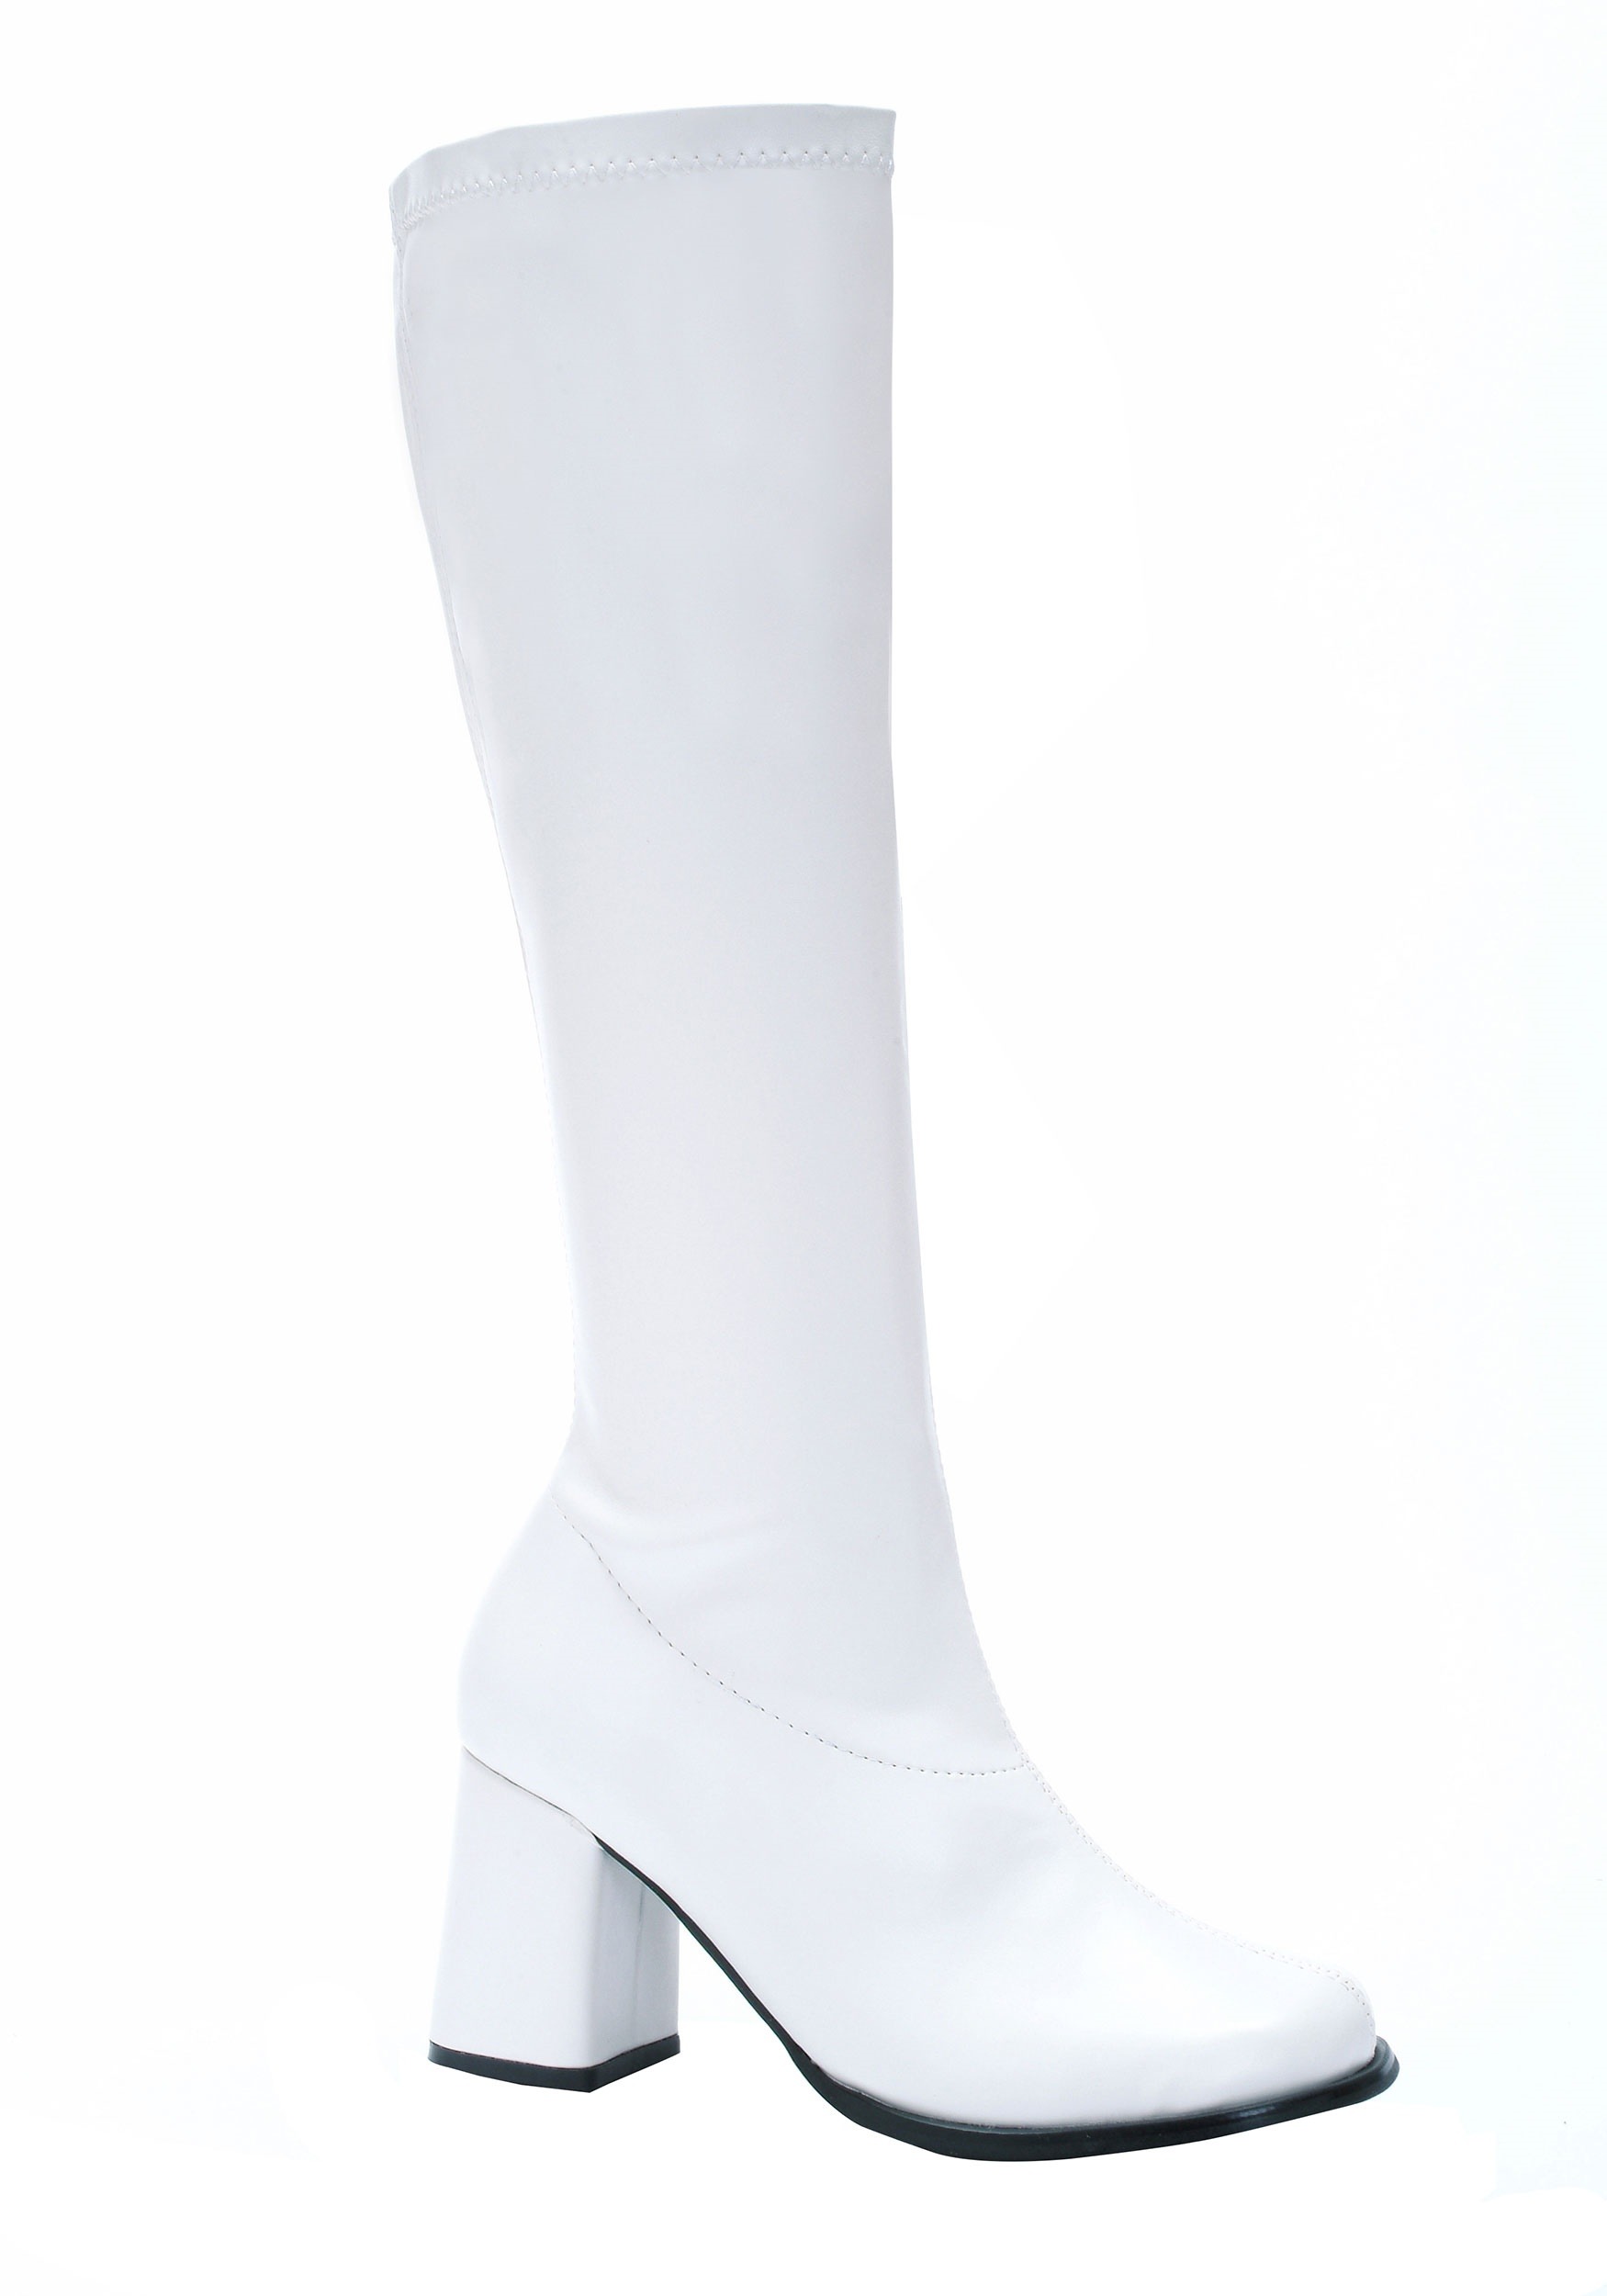 https://images.fun.com/products/44023/1-1/white-gogo-womens-boots.jpg